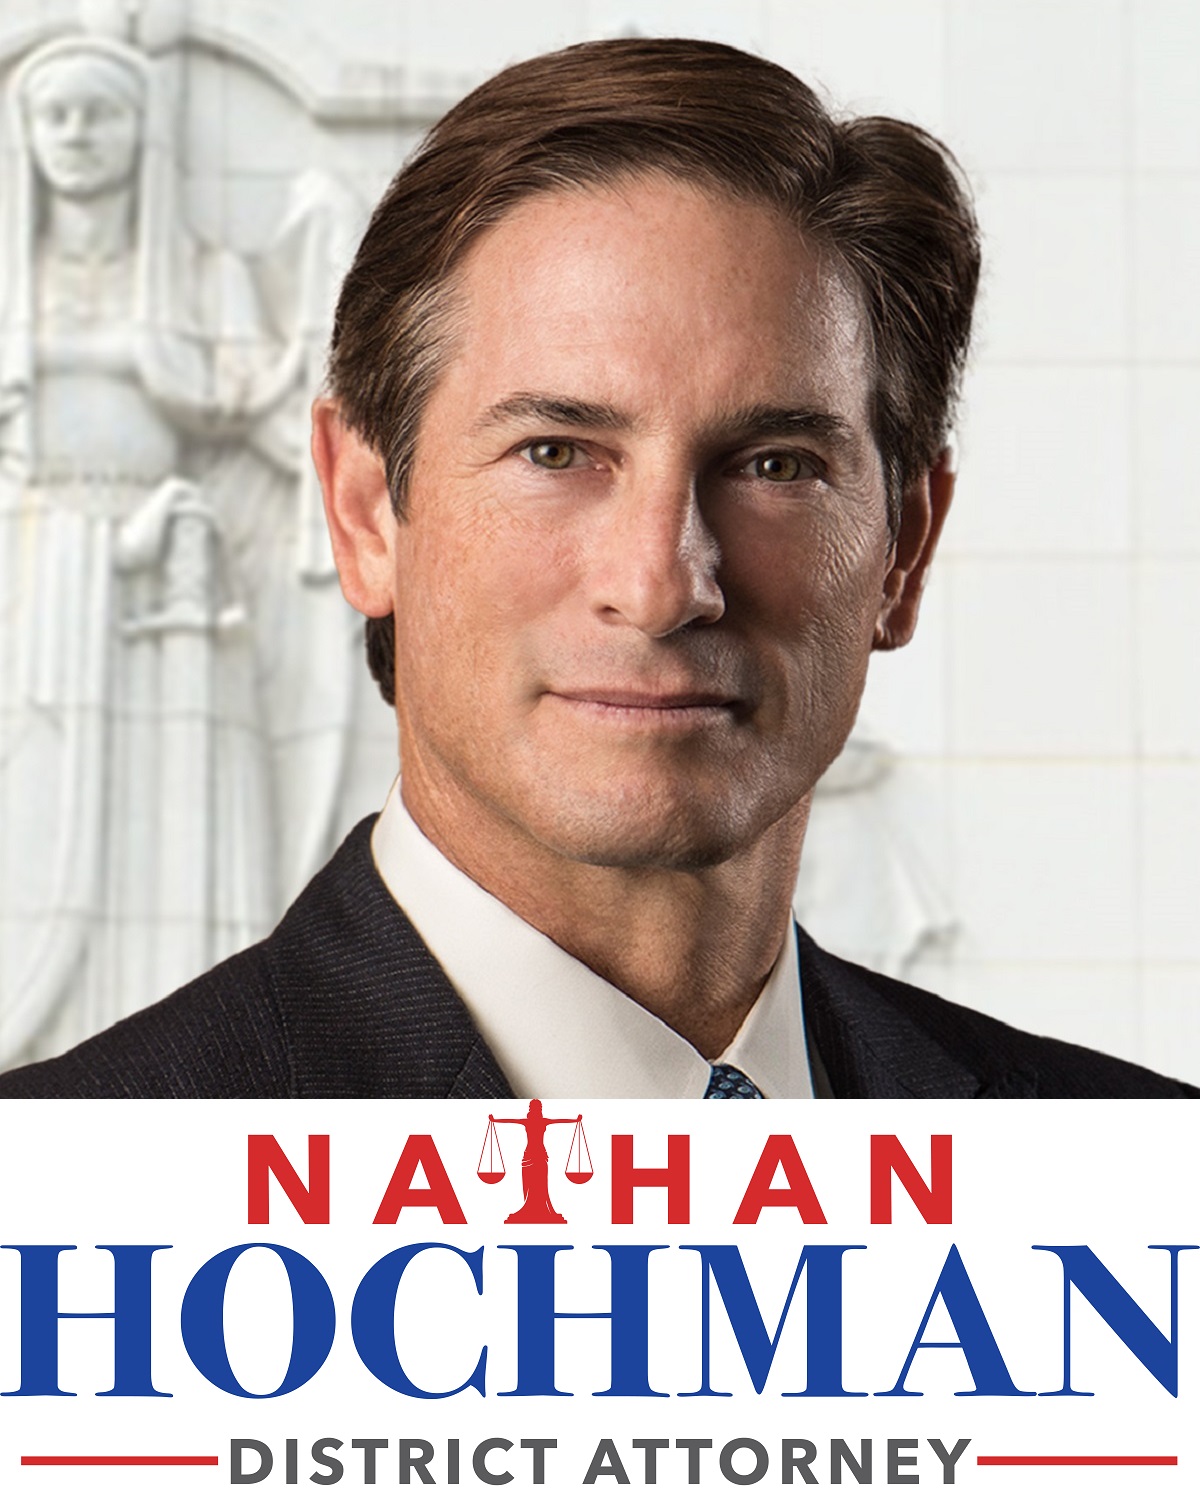 Nathan Hochman For District Attorney of Los Angeles County